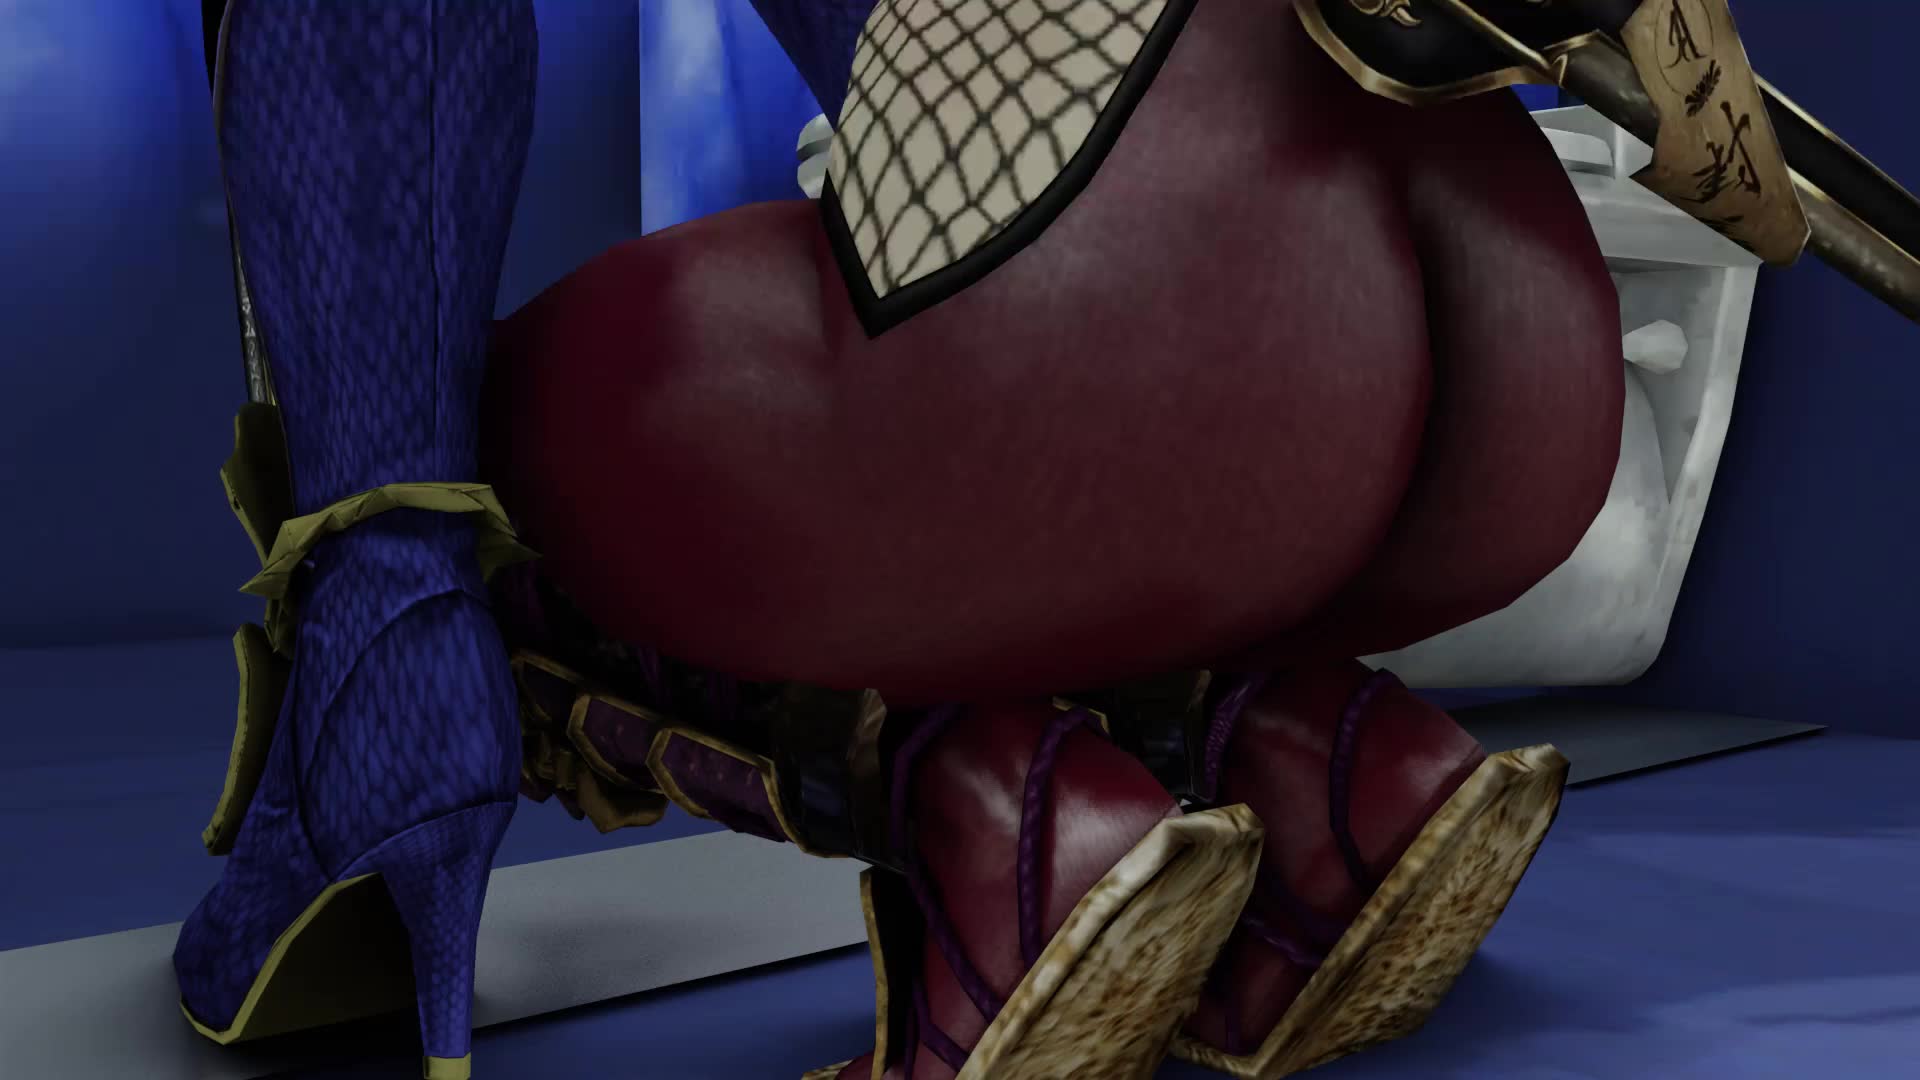 Isabella Valentine And Taki In Lesbian Sex – Soul Calibur NSFW animation thumbnail